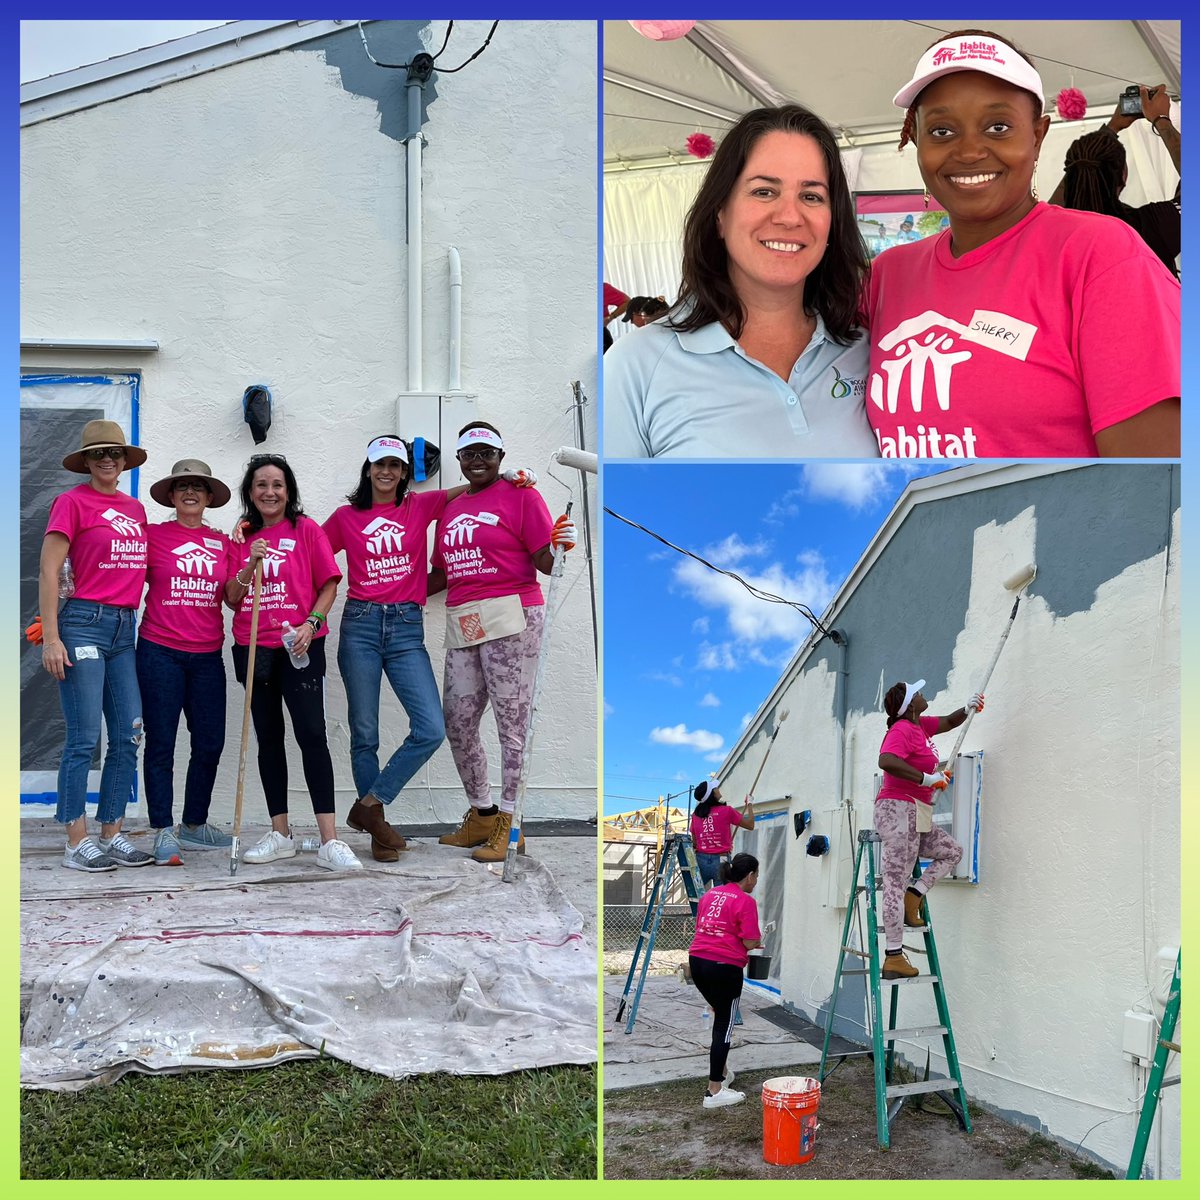 HabCenter’s CEO, Sherry A. Henry, is gearing up for this year's Habitat for Humanity Women Build. This annual women-powered event supports affordable housing in Palm Beach County. The event unites women in a powerful mission to support affordable housing.